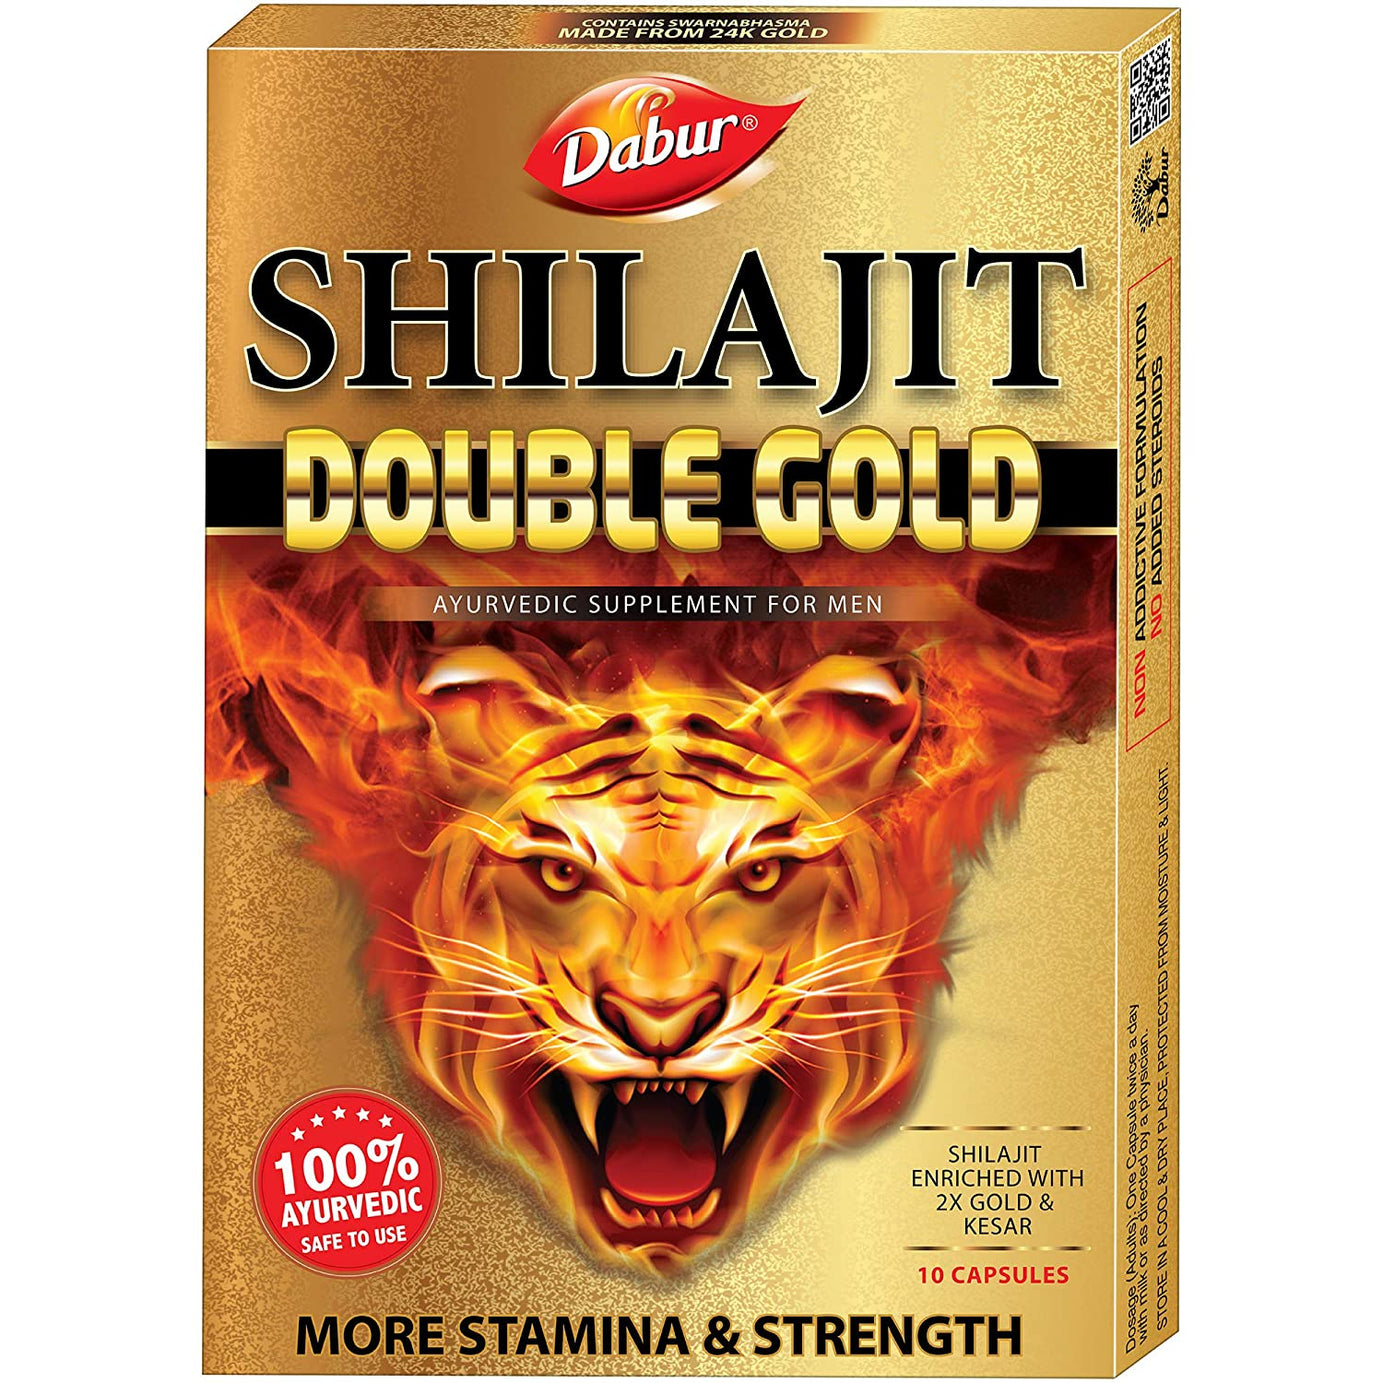 Shop Shilajit Double Gold Capsules - 10Capsules at price 350.00 from Dabur Online - Ayush Care